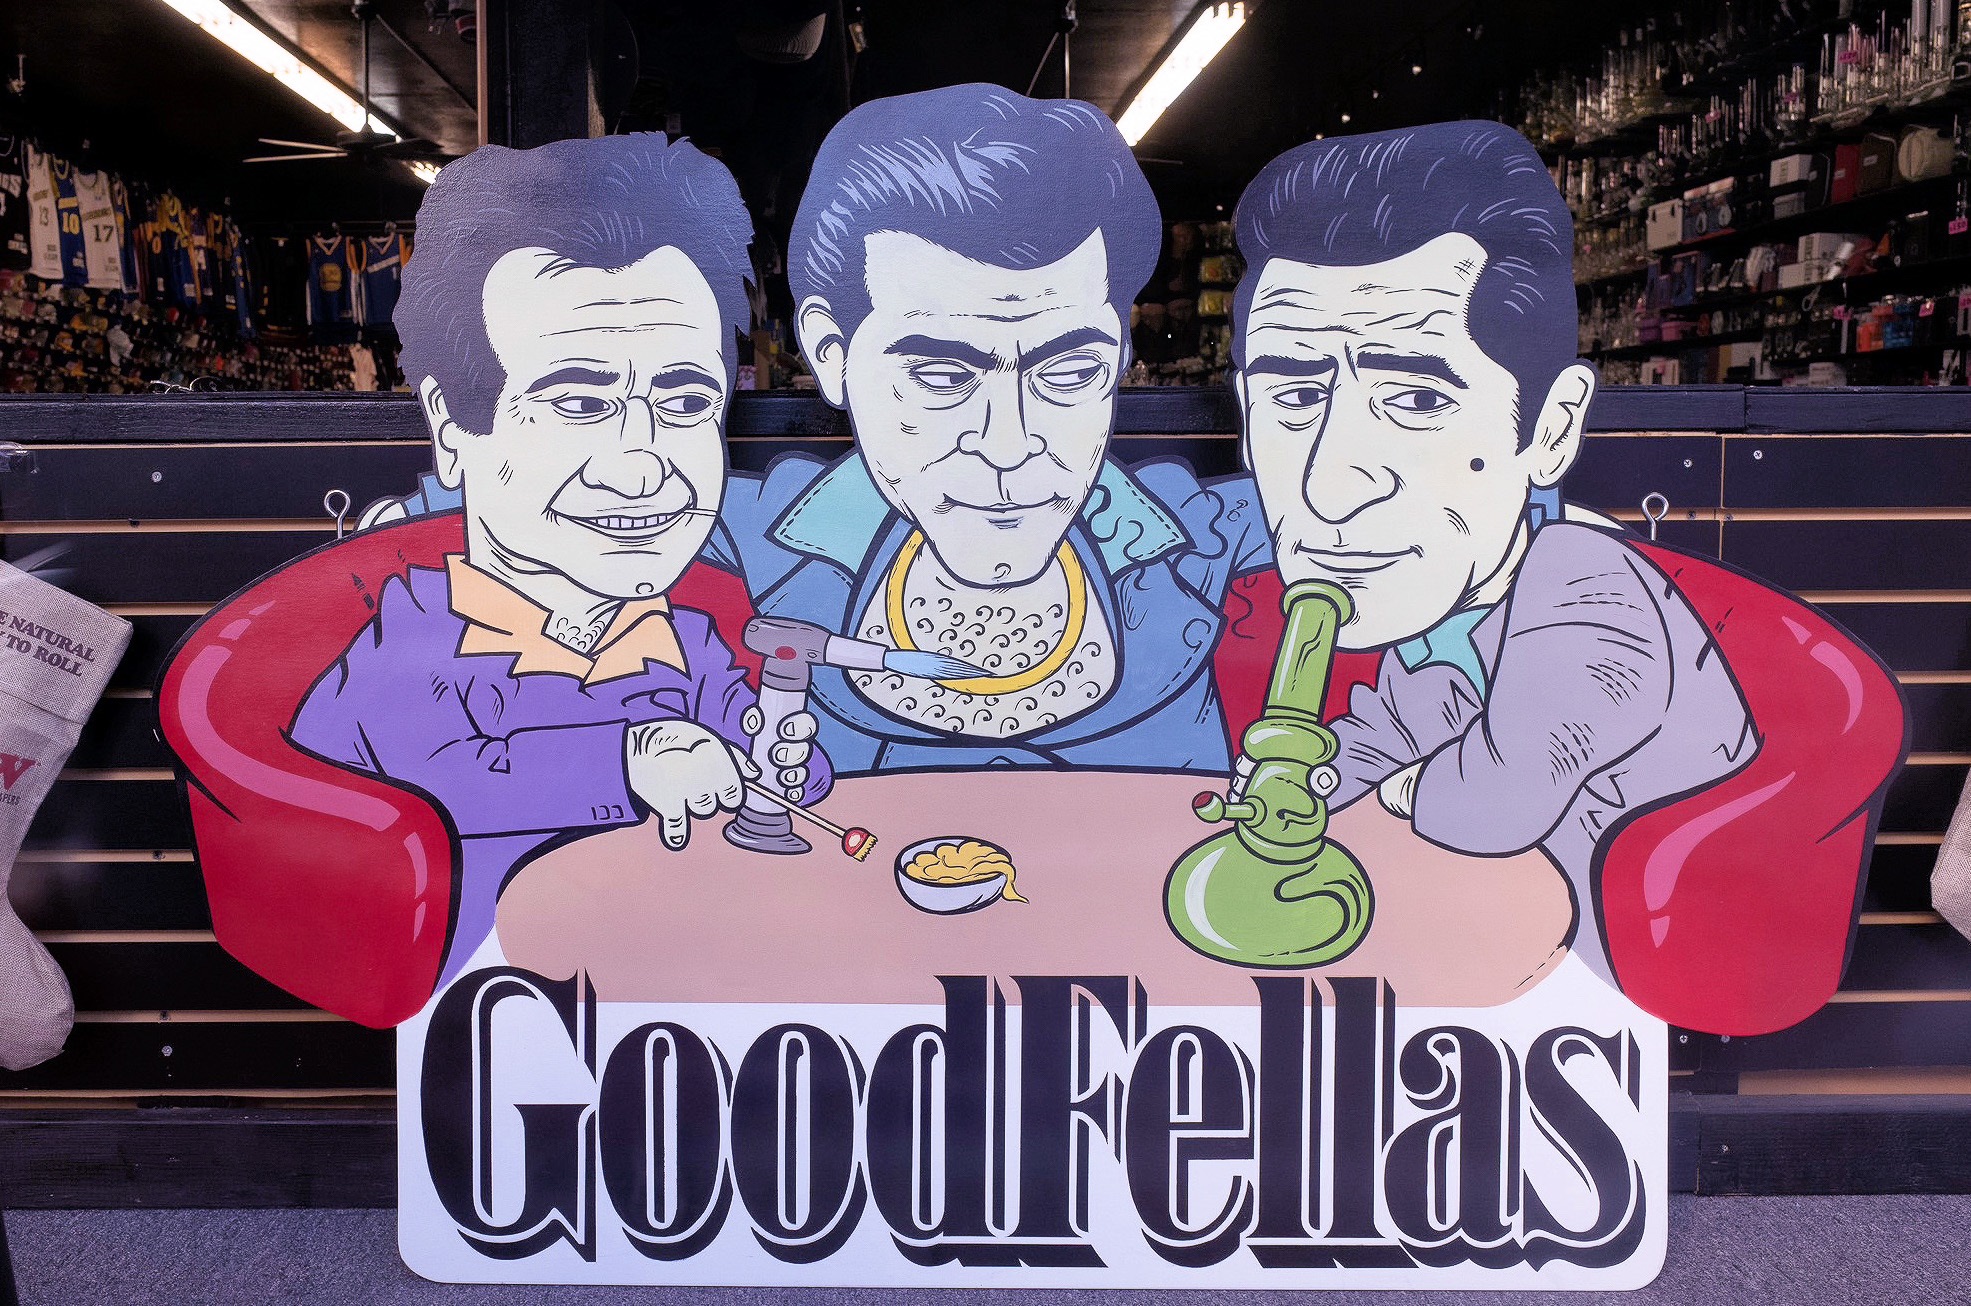 Caricatures of characters from the film, "Goodfellas"